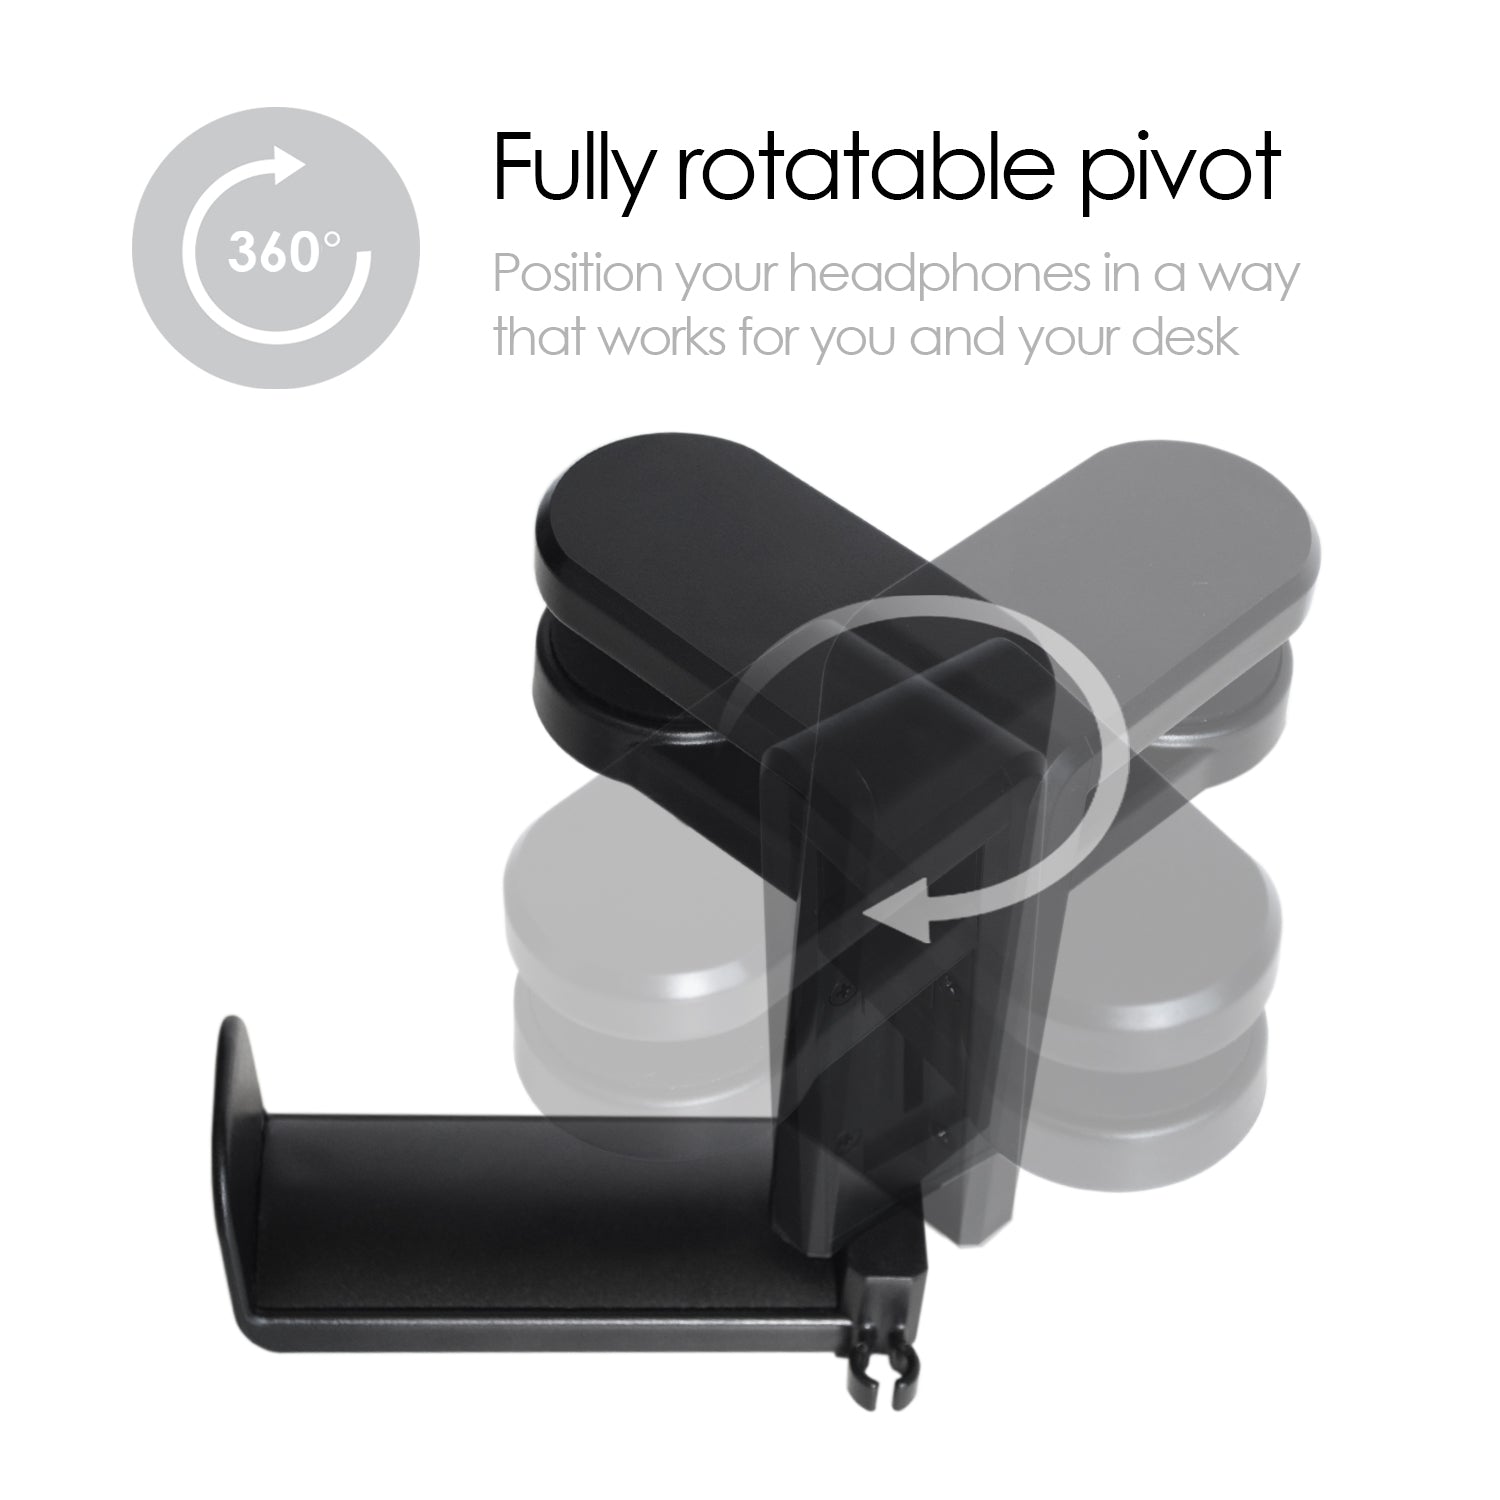 Fully rotatable pivot. Position your headphones in a way that works for your desk